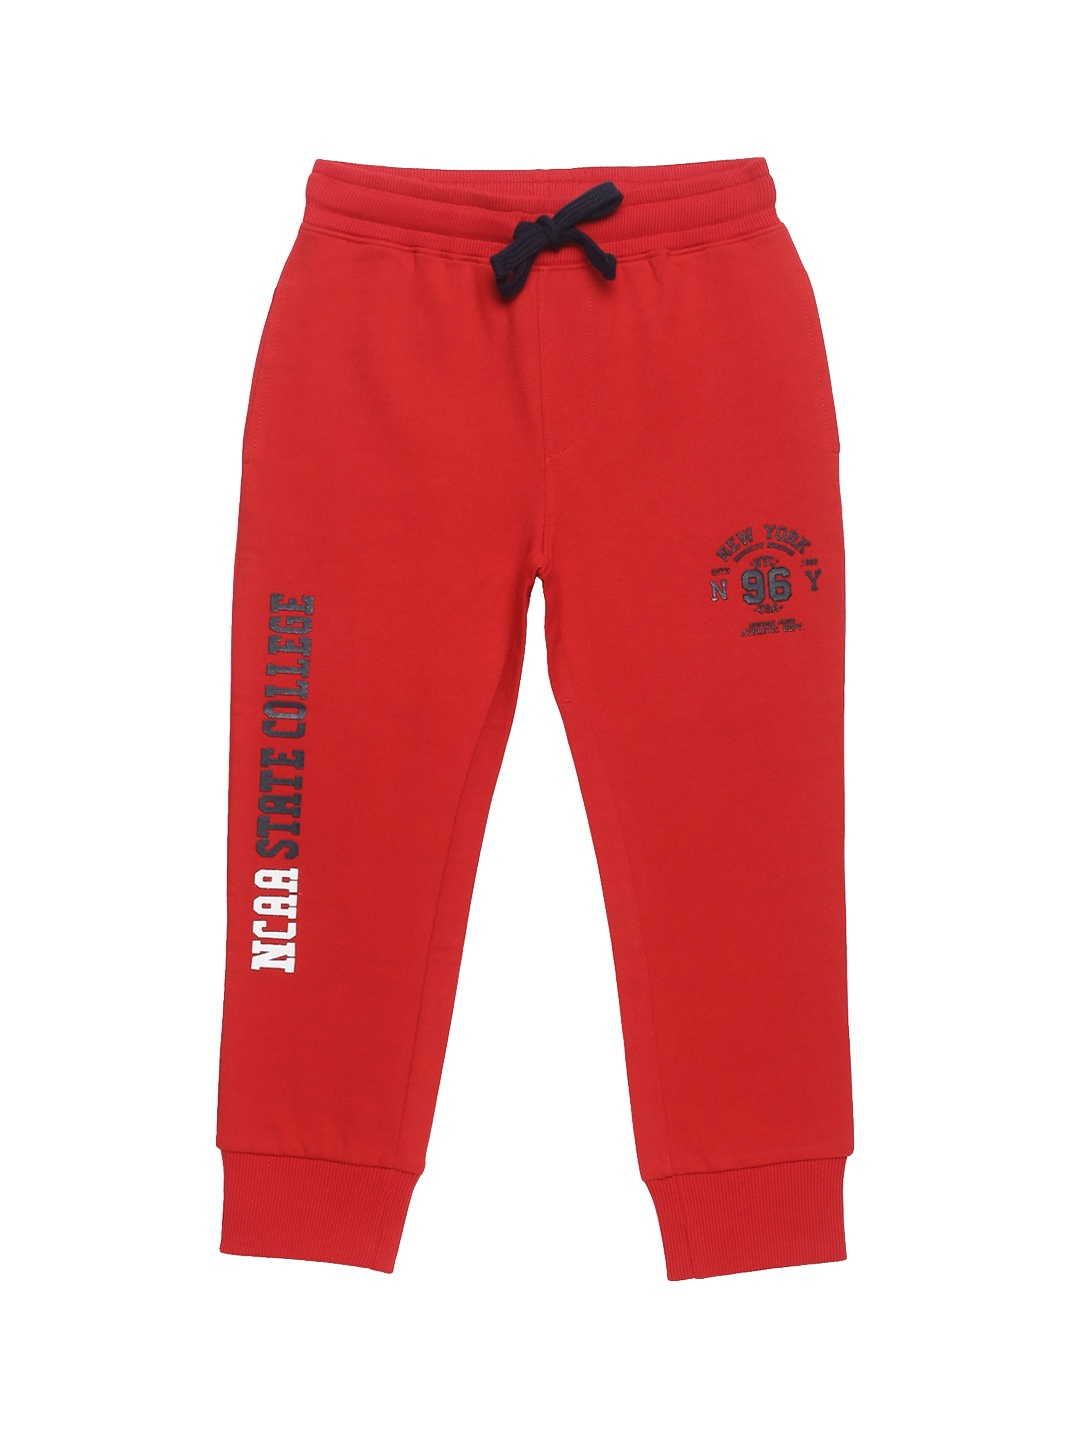 

PLUM TREE Boys Red & Black Printed Pure Cotton Loose-Fit Joggers